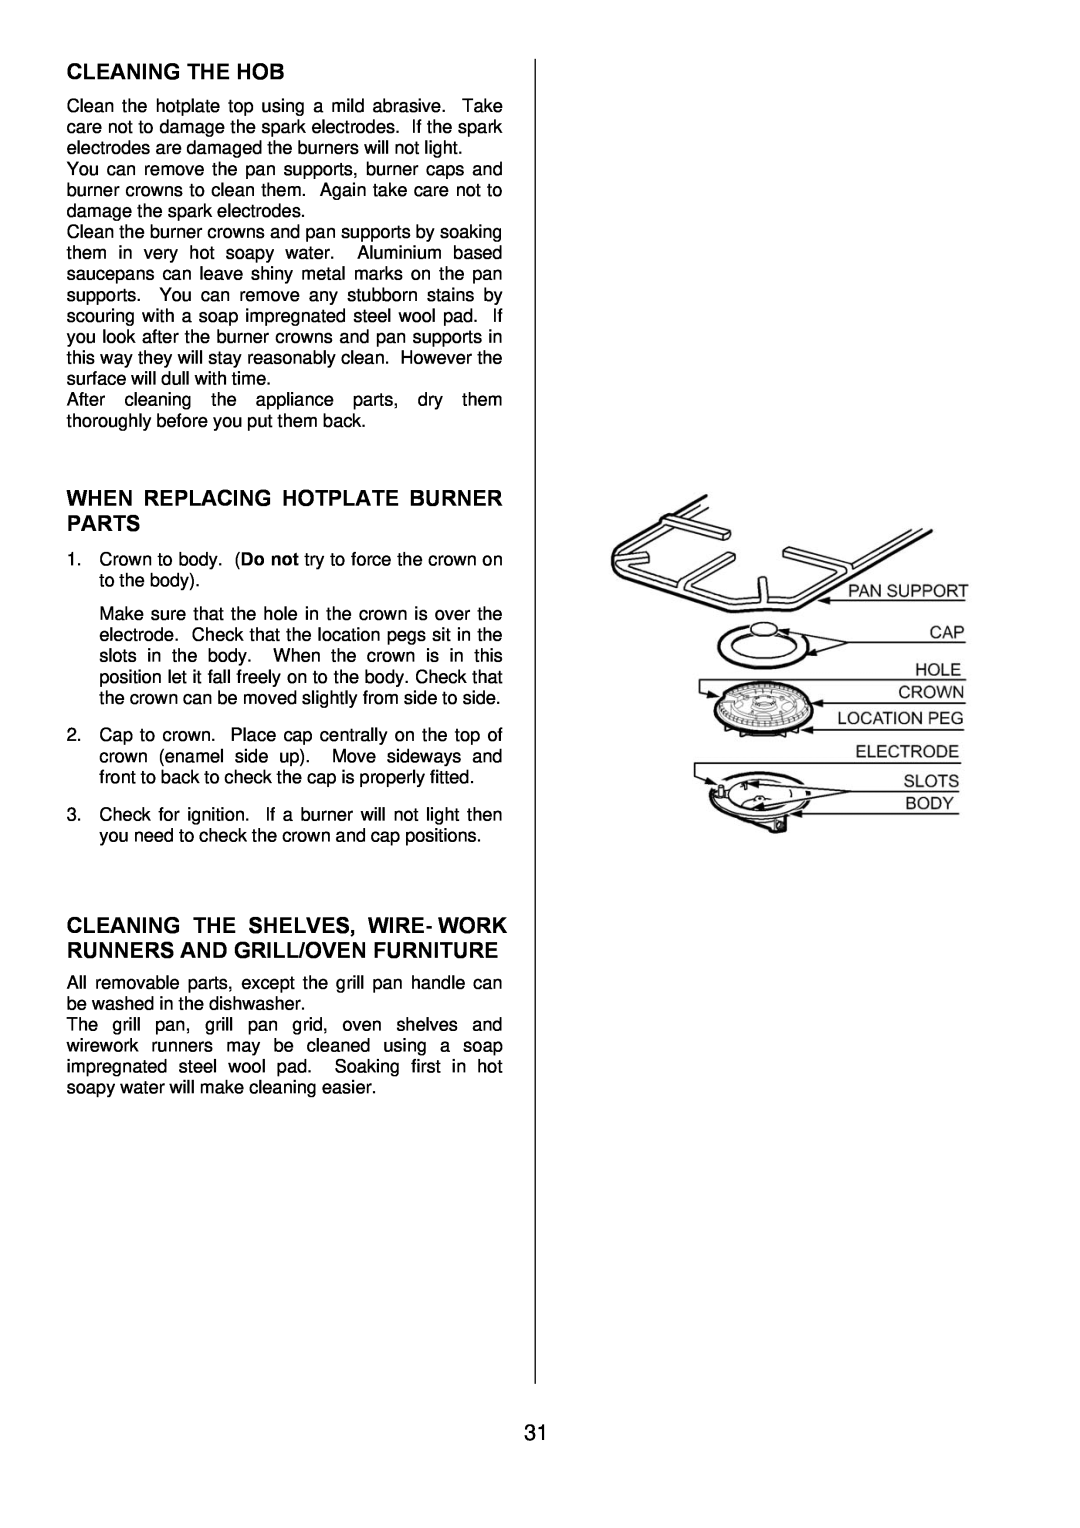 Electrolux D77000GF operating instructions Cleaning The Hob, When Replacing Hotplate Burner Parts 